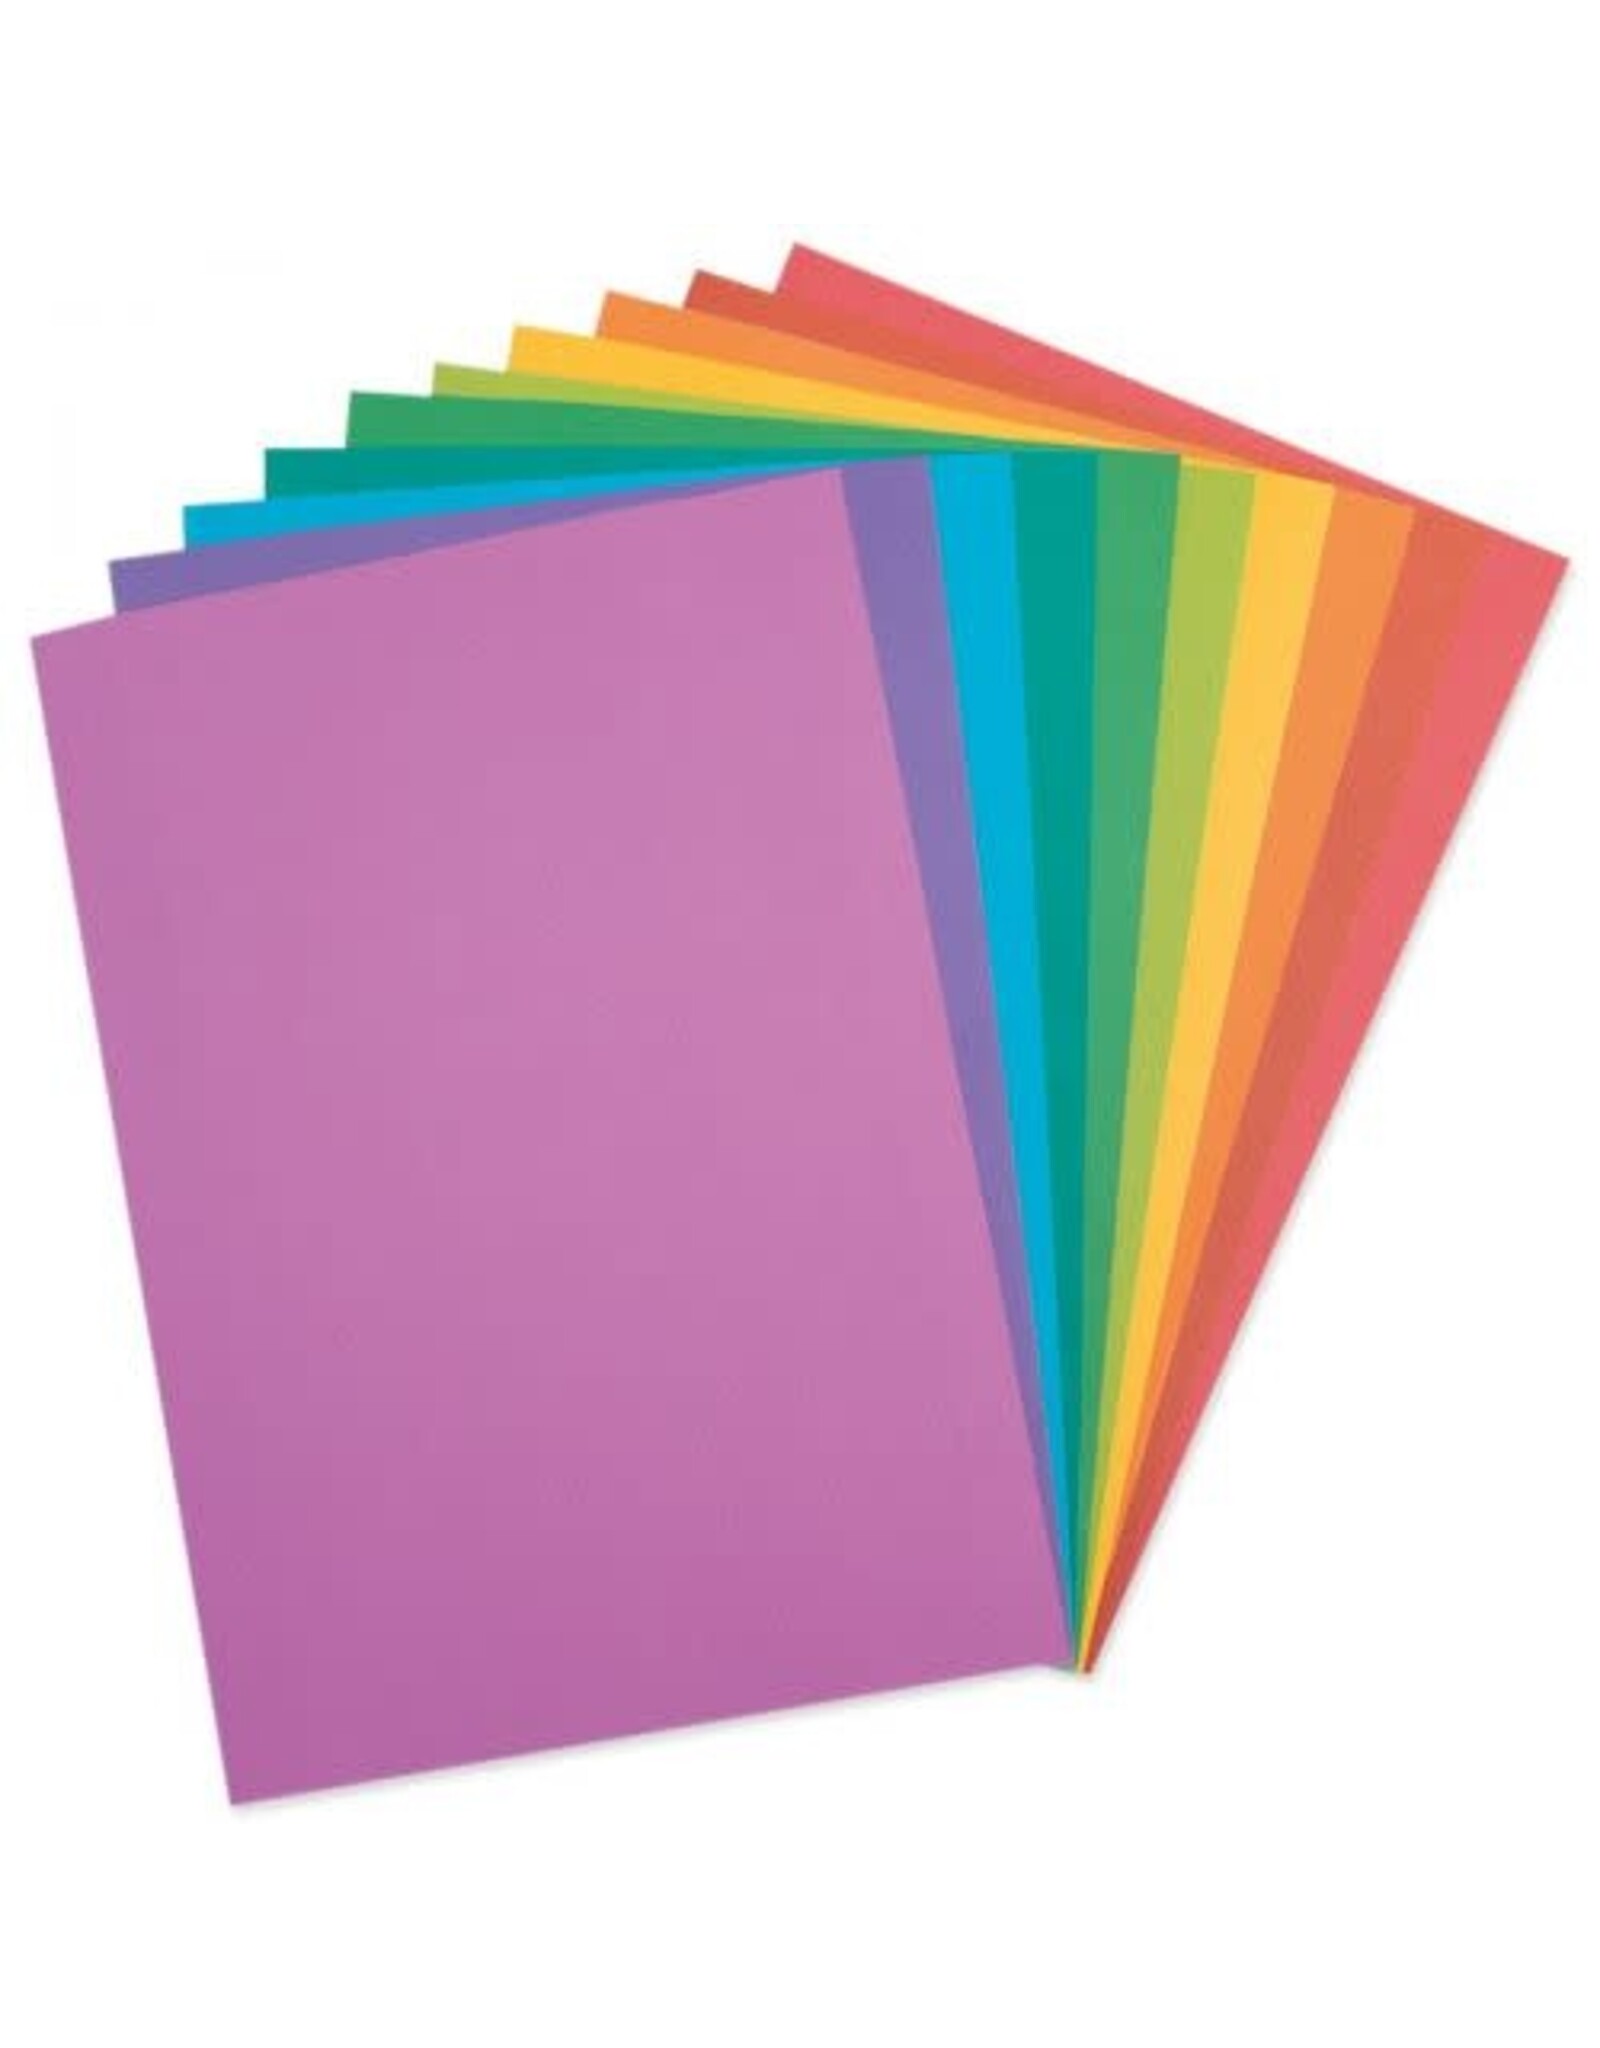 SIZZIX SIZZIX SURFACEZ ASSORTED COLORS JEWEL COLLECTION REVEALZ SANDABLE A6 CARDSTOCK 40 SHEETS